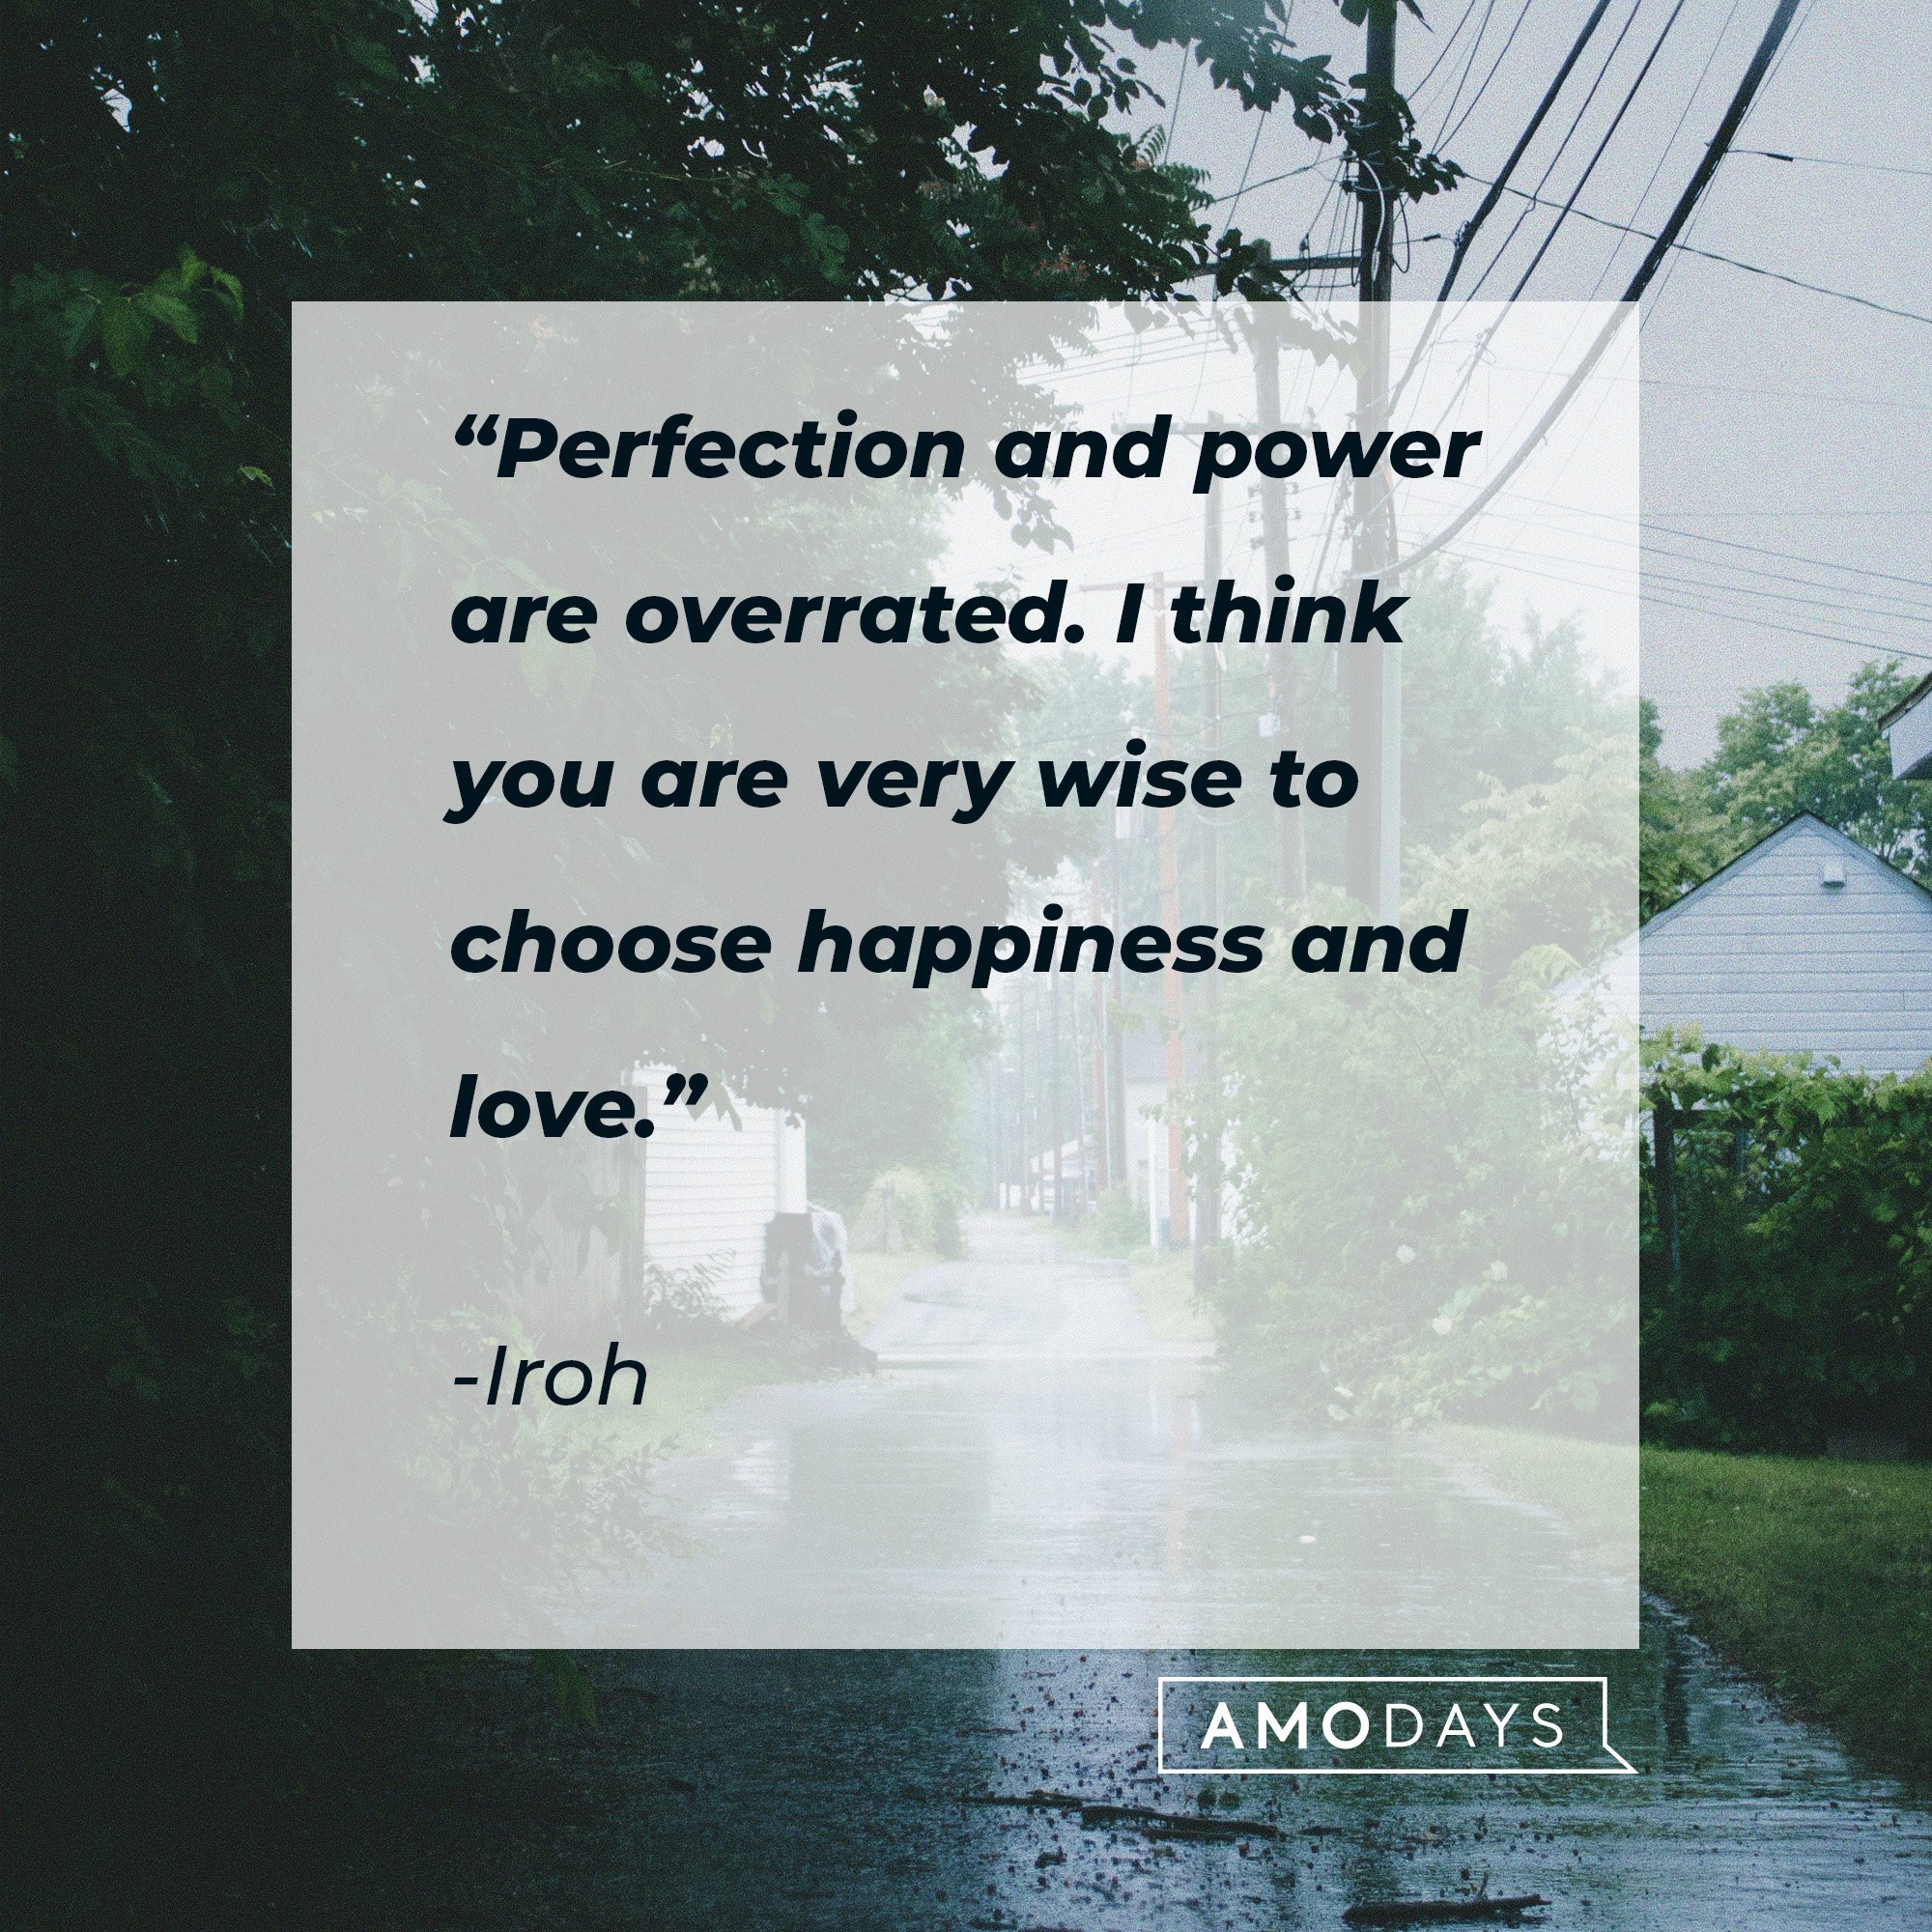 Iroh's quote: “Perfection and power are overrated. I think you are very wise to choose happiness and love.” | Image: AmoDays